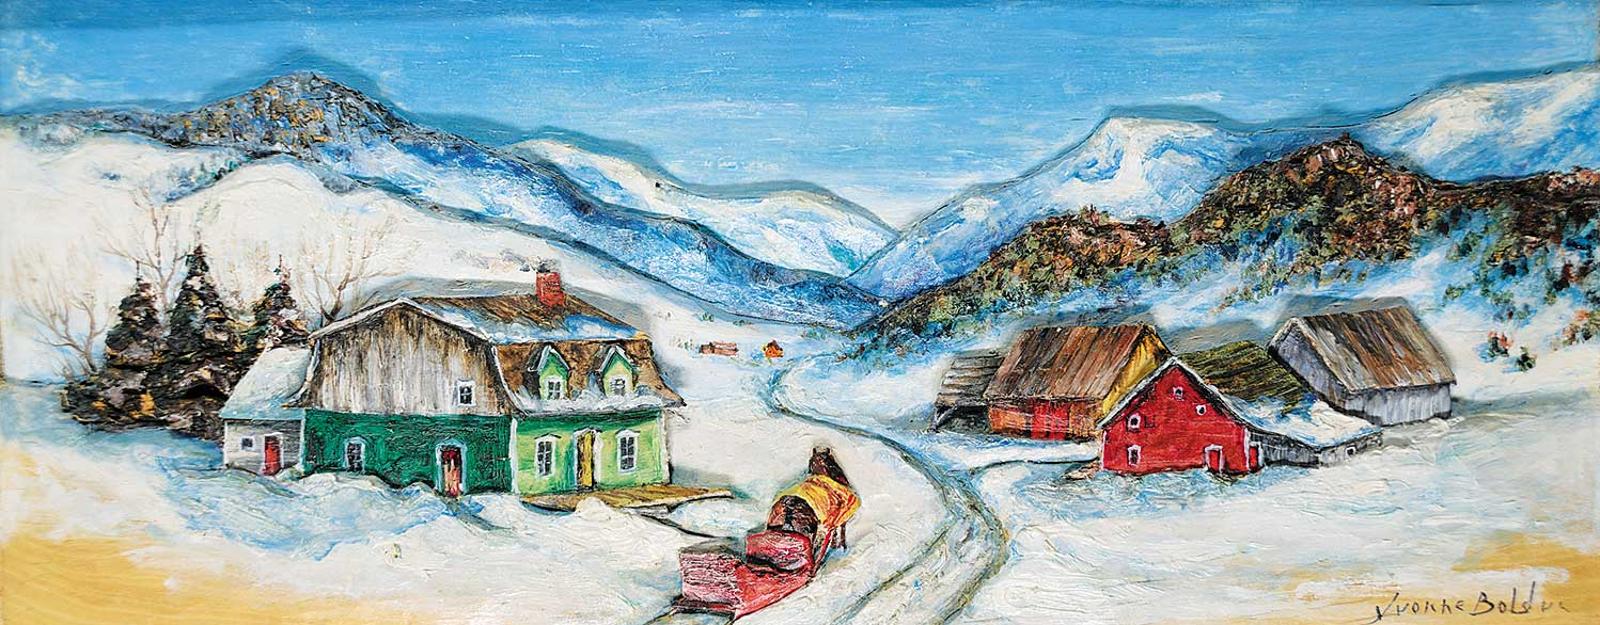 Yvonne Bolduc (1905-1983) - Untitled - Horse and Sleigh Waiting in the Mountain Village